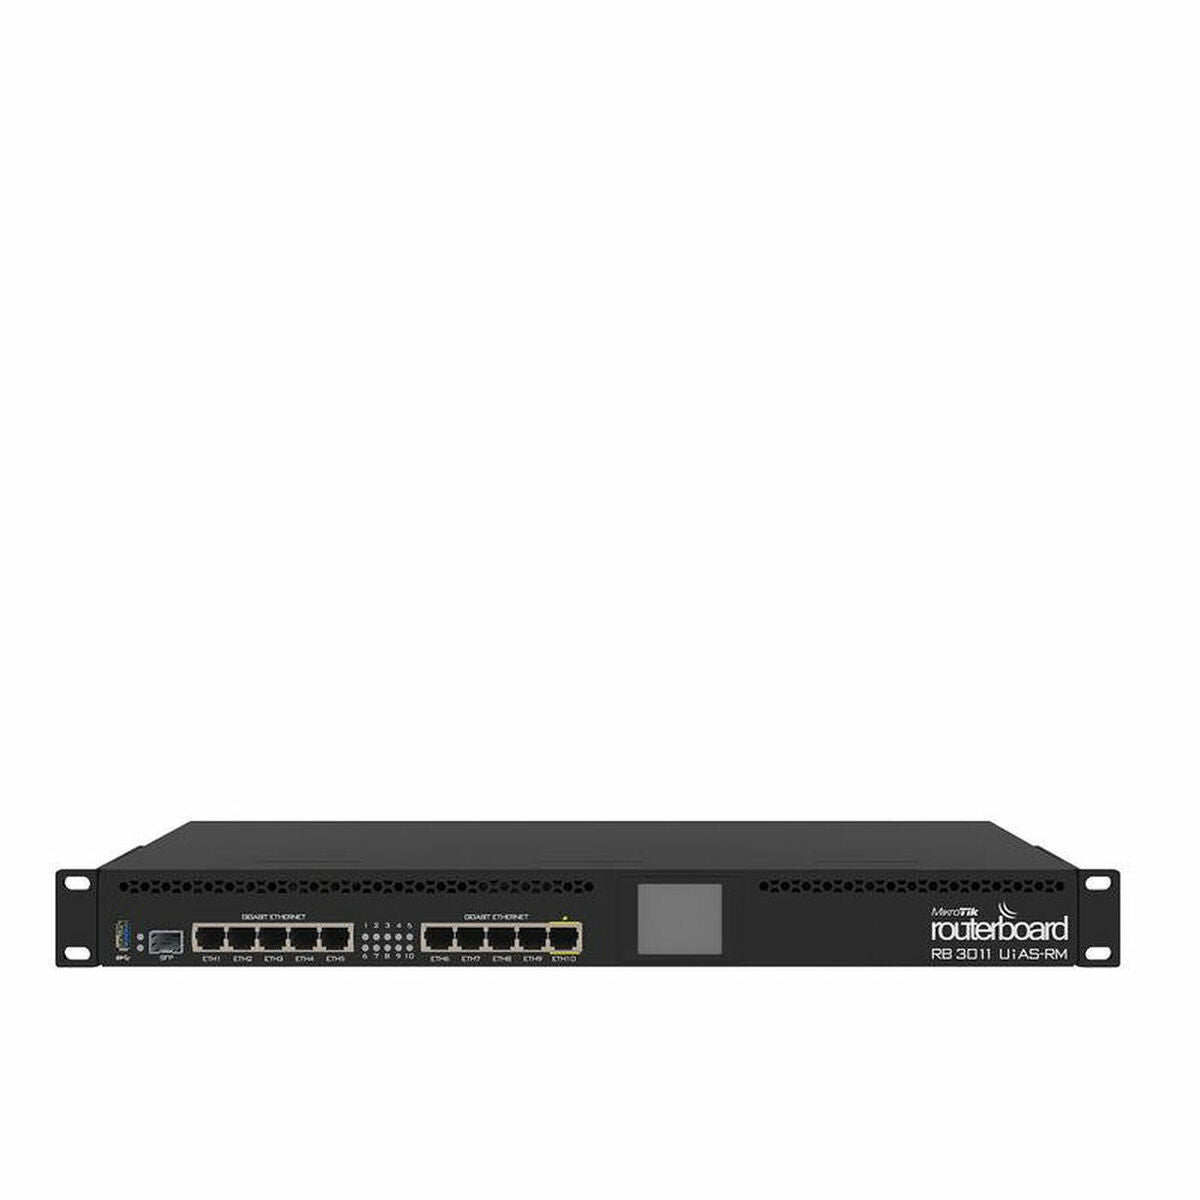 Router Mikrotik RB3011UIAS-RM Gigabit Ethernet Black, Mikrotik, Computing, Network devices, router-mikrotik-rb3011uias-rm-gigabit-ethernet-black, Brand_Mikrotik, category-reference-2609, category-reference-2803, category-reference-2826, category-reference-t-19685, category-reference-t-19914, Condition_NEW, networks/wiring, Price_100 - 200, RiotNook